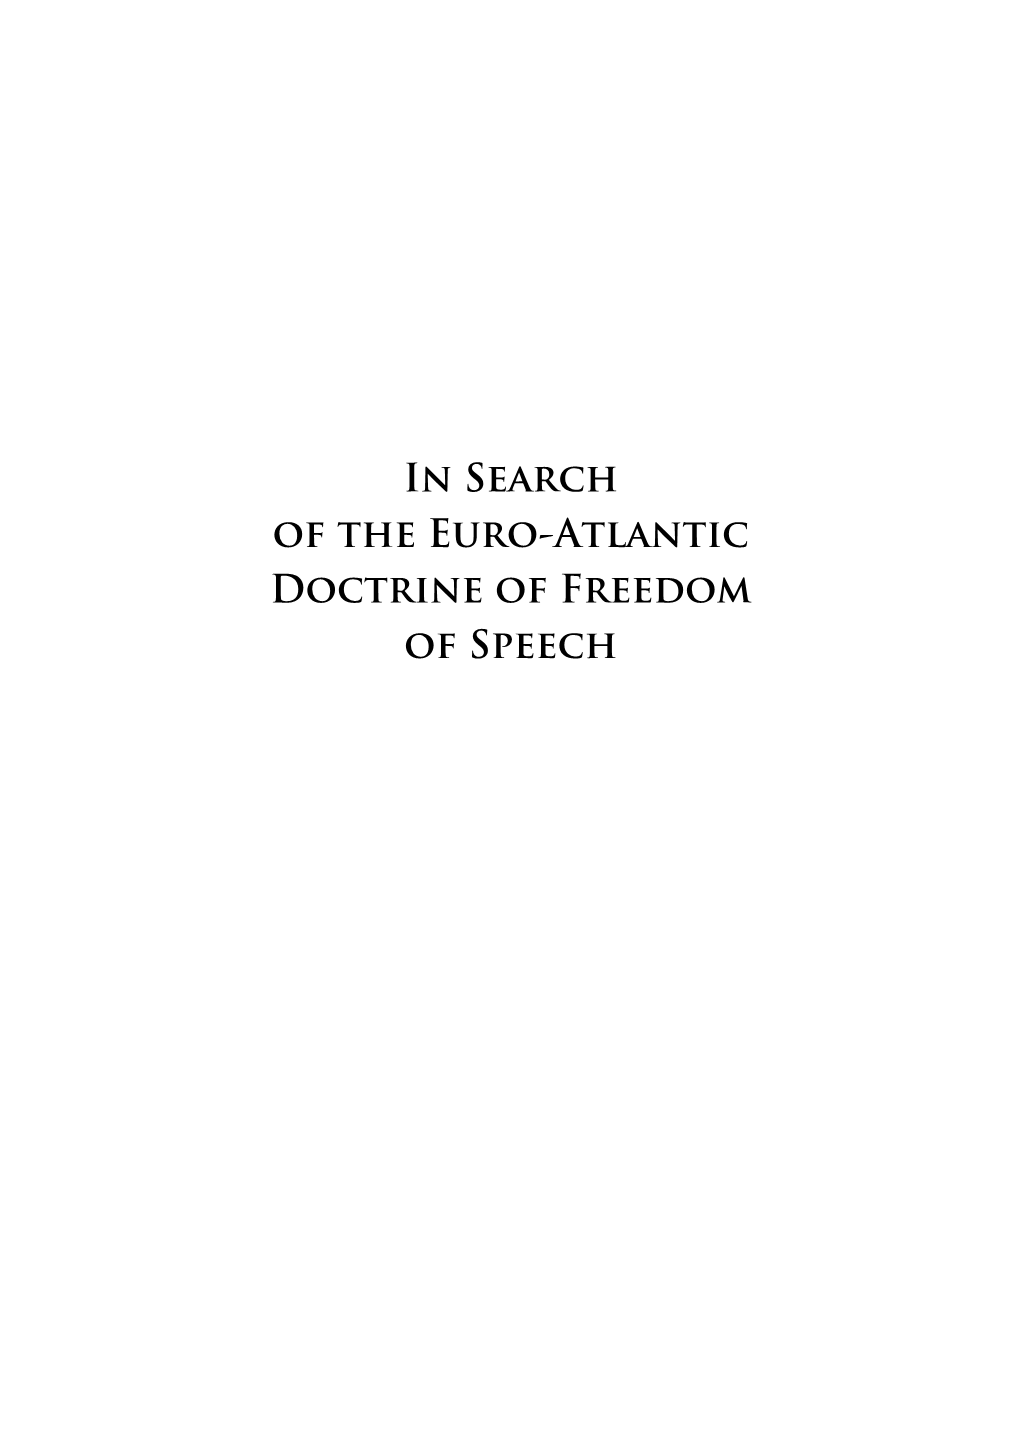 In Search of the Euro-Atlantic Doctrine of Freedom of Speech